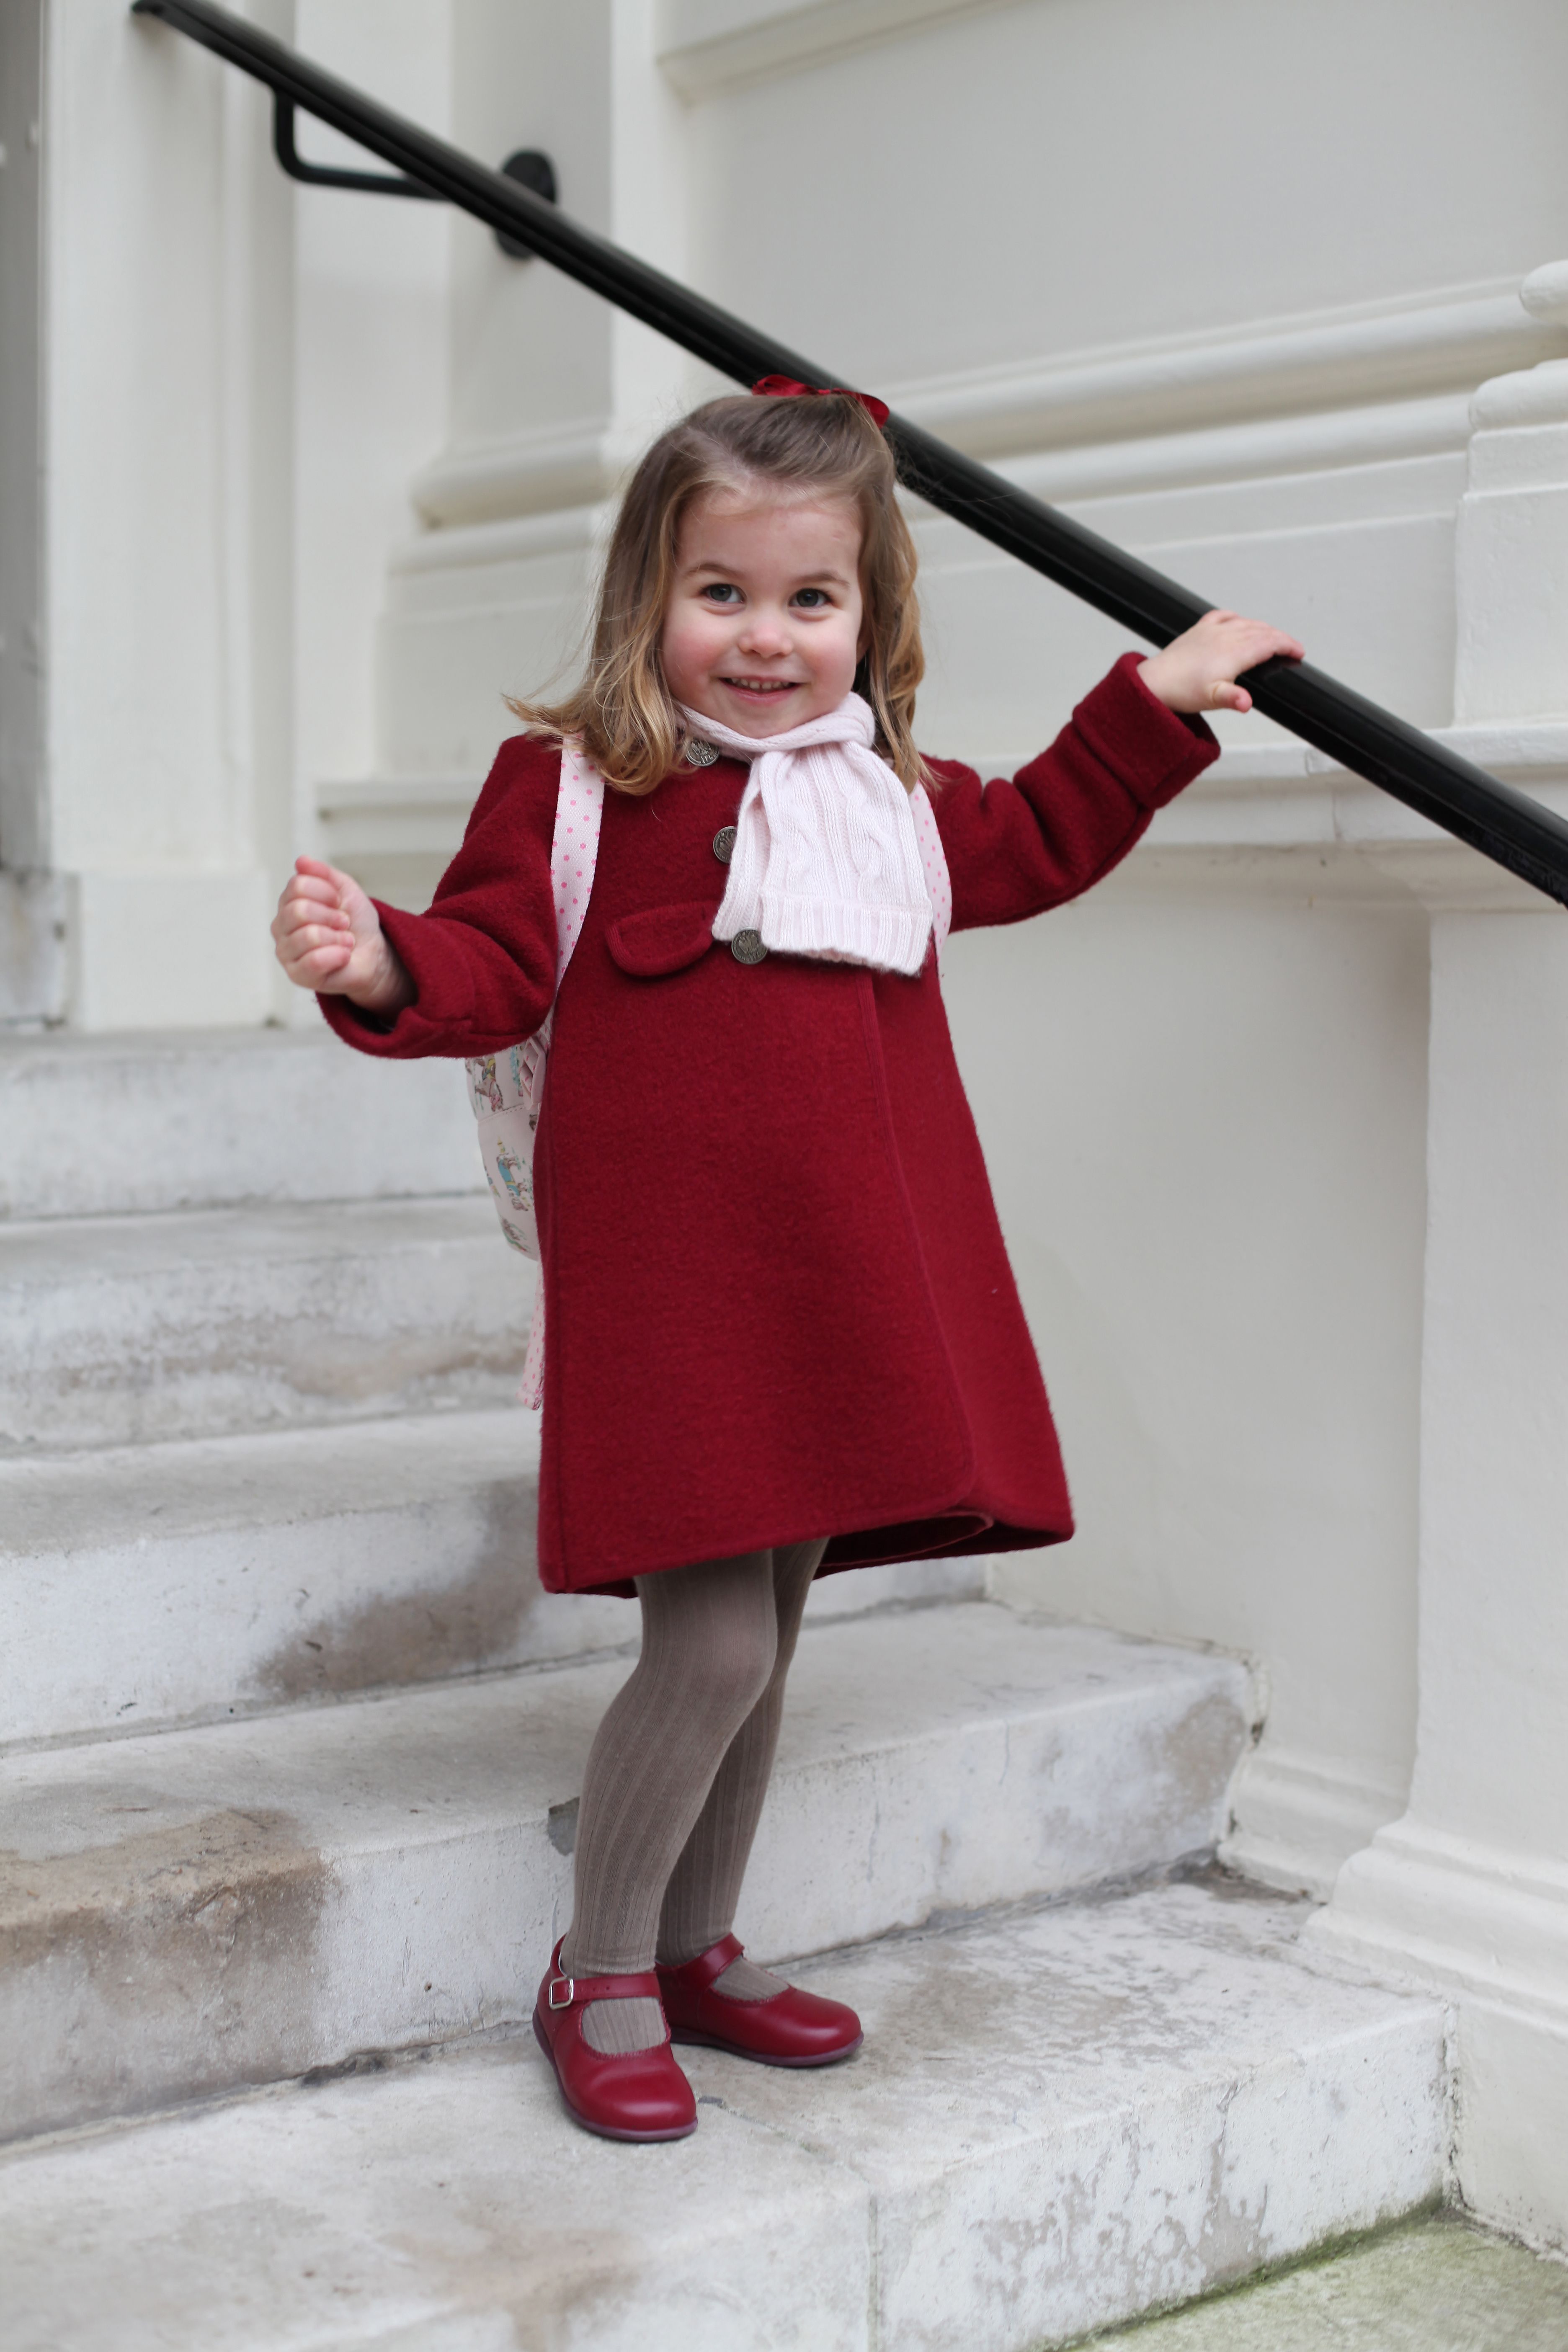 Princess Charlotte  at Kensington Palace before her first day of nursery at the Willcocks Nursery School on January 08, 2018 in London, United Kingdom. | Source: Getty Images